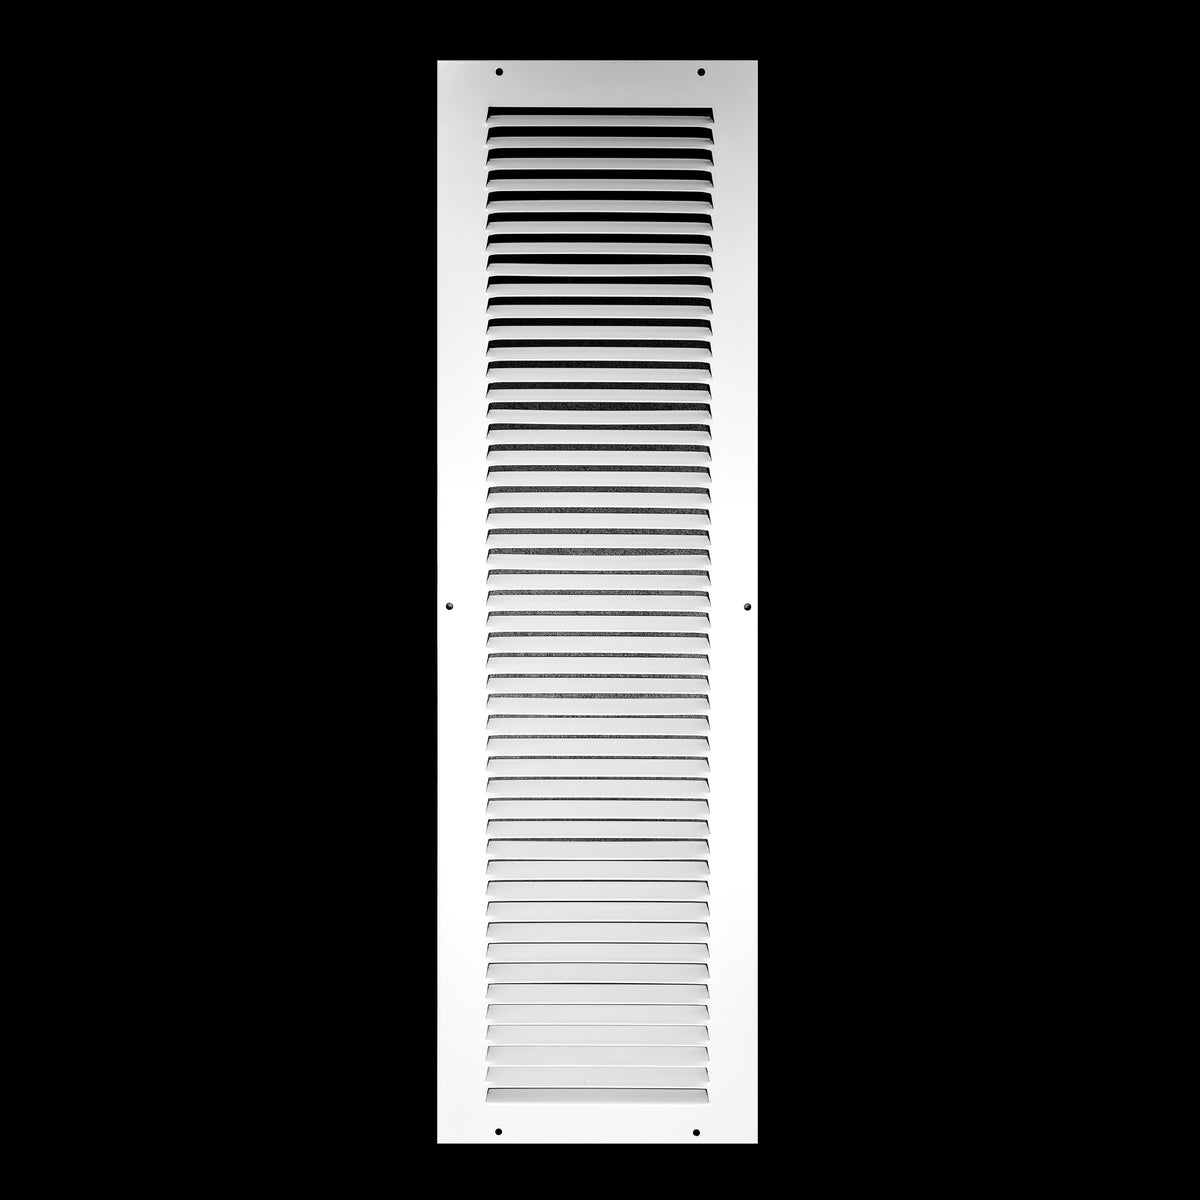 airgrilles 6" x 30" duct opening steel return air grille for sidewall and ceiling hnd-flt-1rag-wh-6x30 756014647945 1